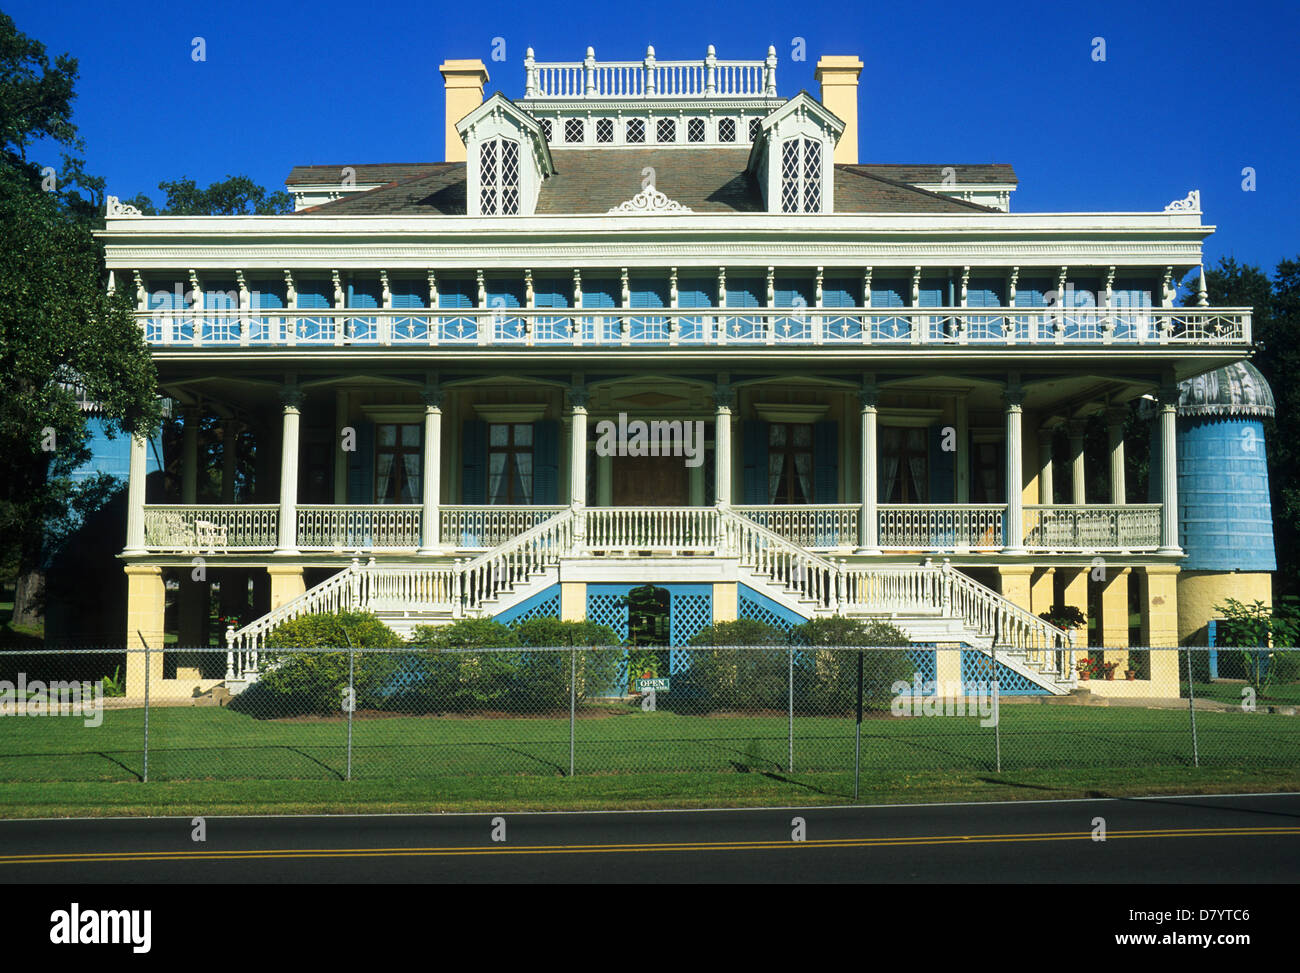 Planters House On The Mississippi River At New Orleans Louisiana